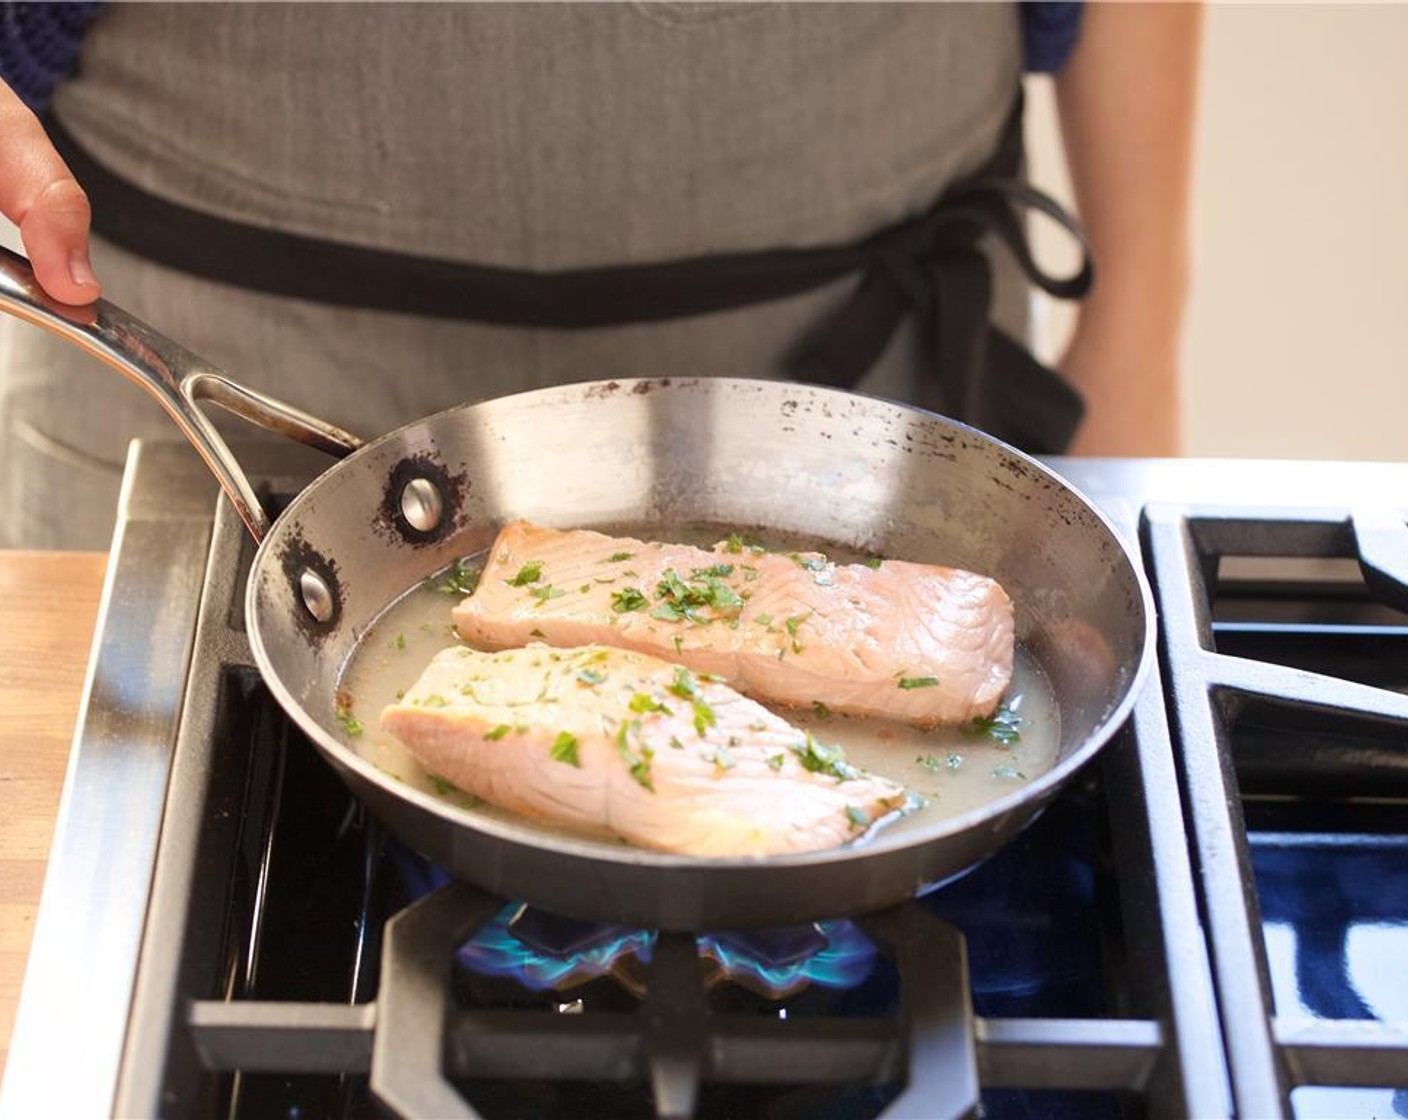 step 4 Heat a medium saute pan over medium heat. Add the White Cooking Wine (1/2 cup) and half a cup of water. Season with Salt (1 tsp) and Ground Black Pepper (1/2 tsp). Add the Salmon Fillets (2) and half of the parsley to the saute pan. Simmer for seven minutes.